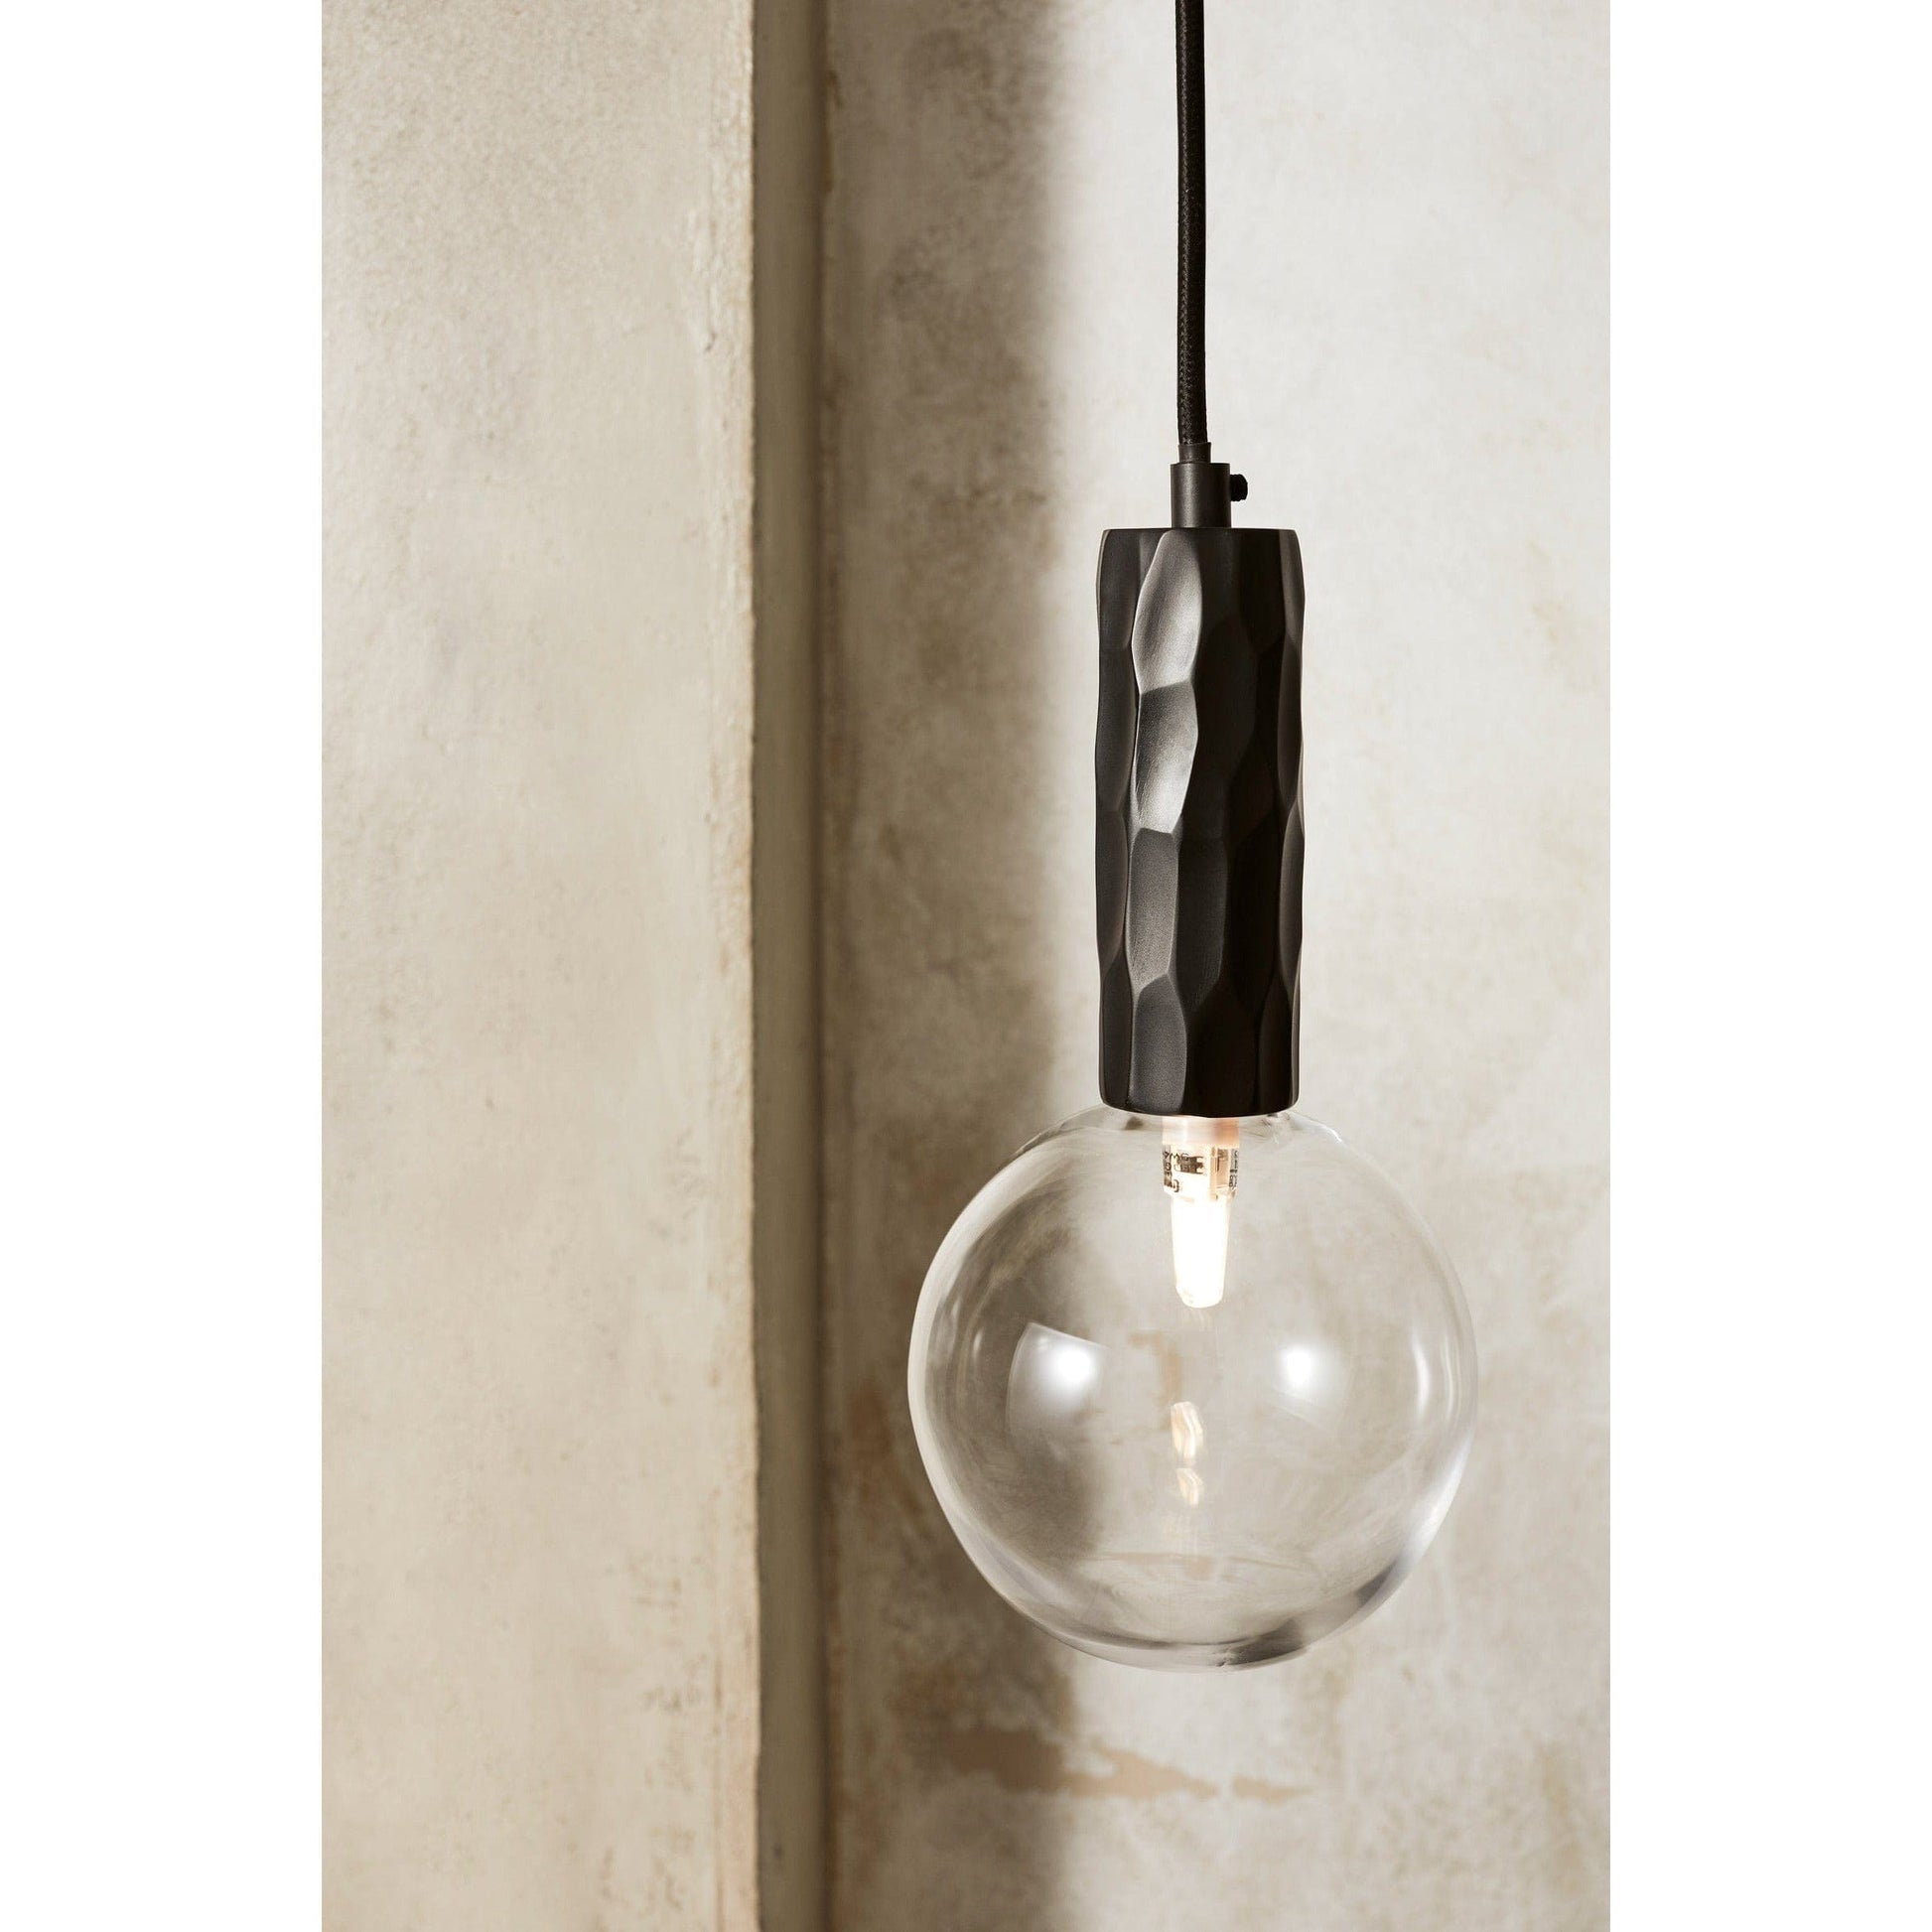 Alex Price Pendant lights KYOTO Pendant Light Black with White, Smoked or Clear Glass